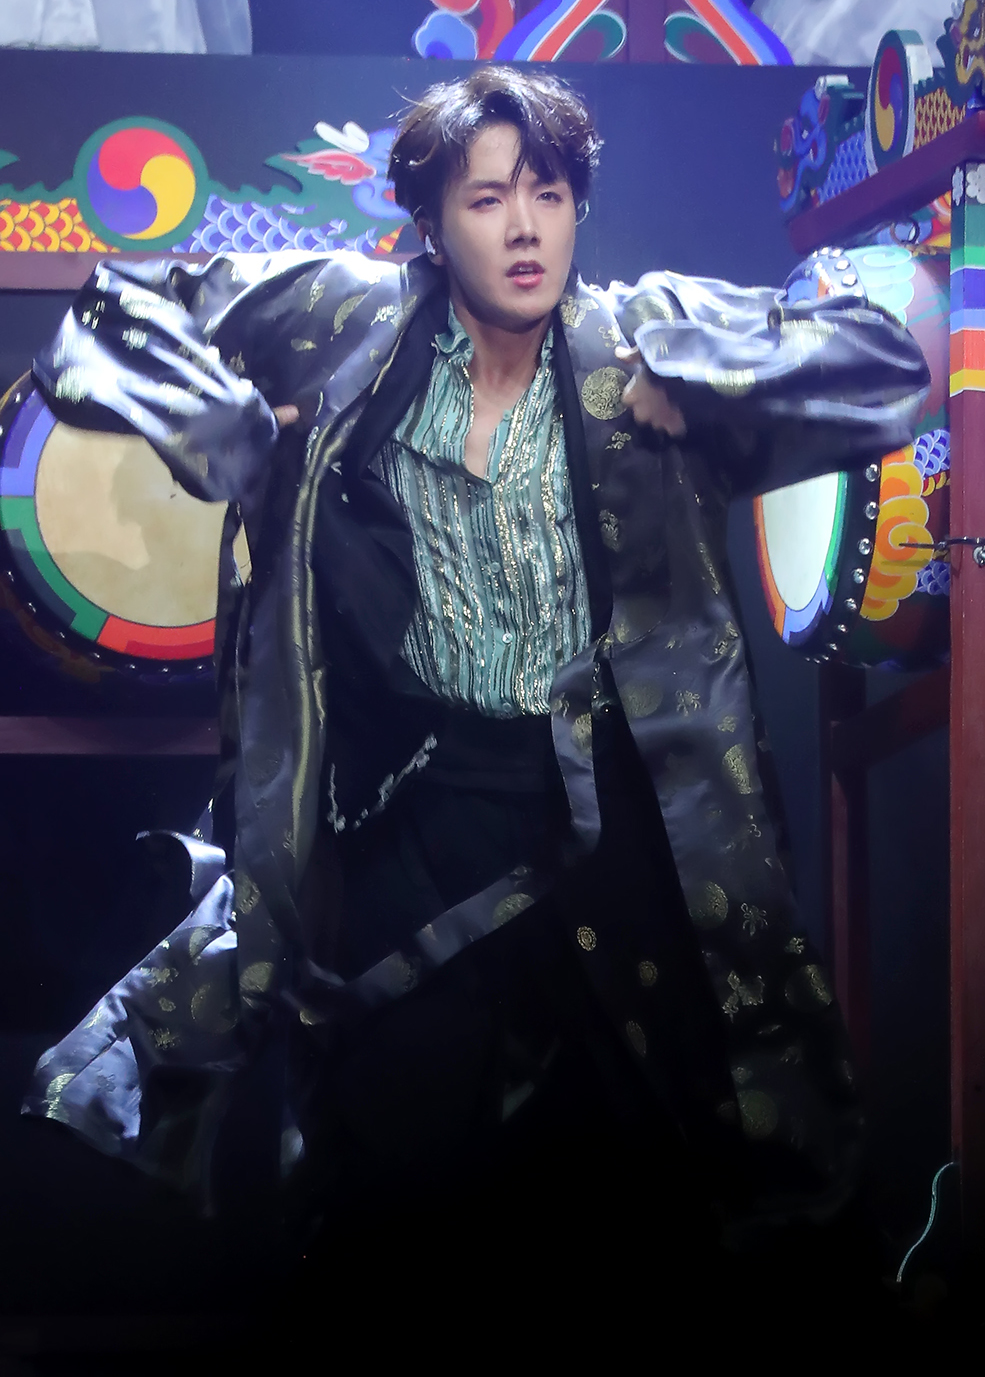 190424 The Fact Music Awards #BTS #JHOPE